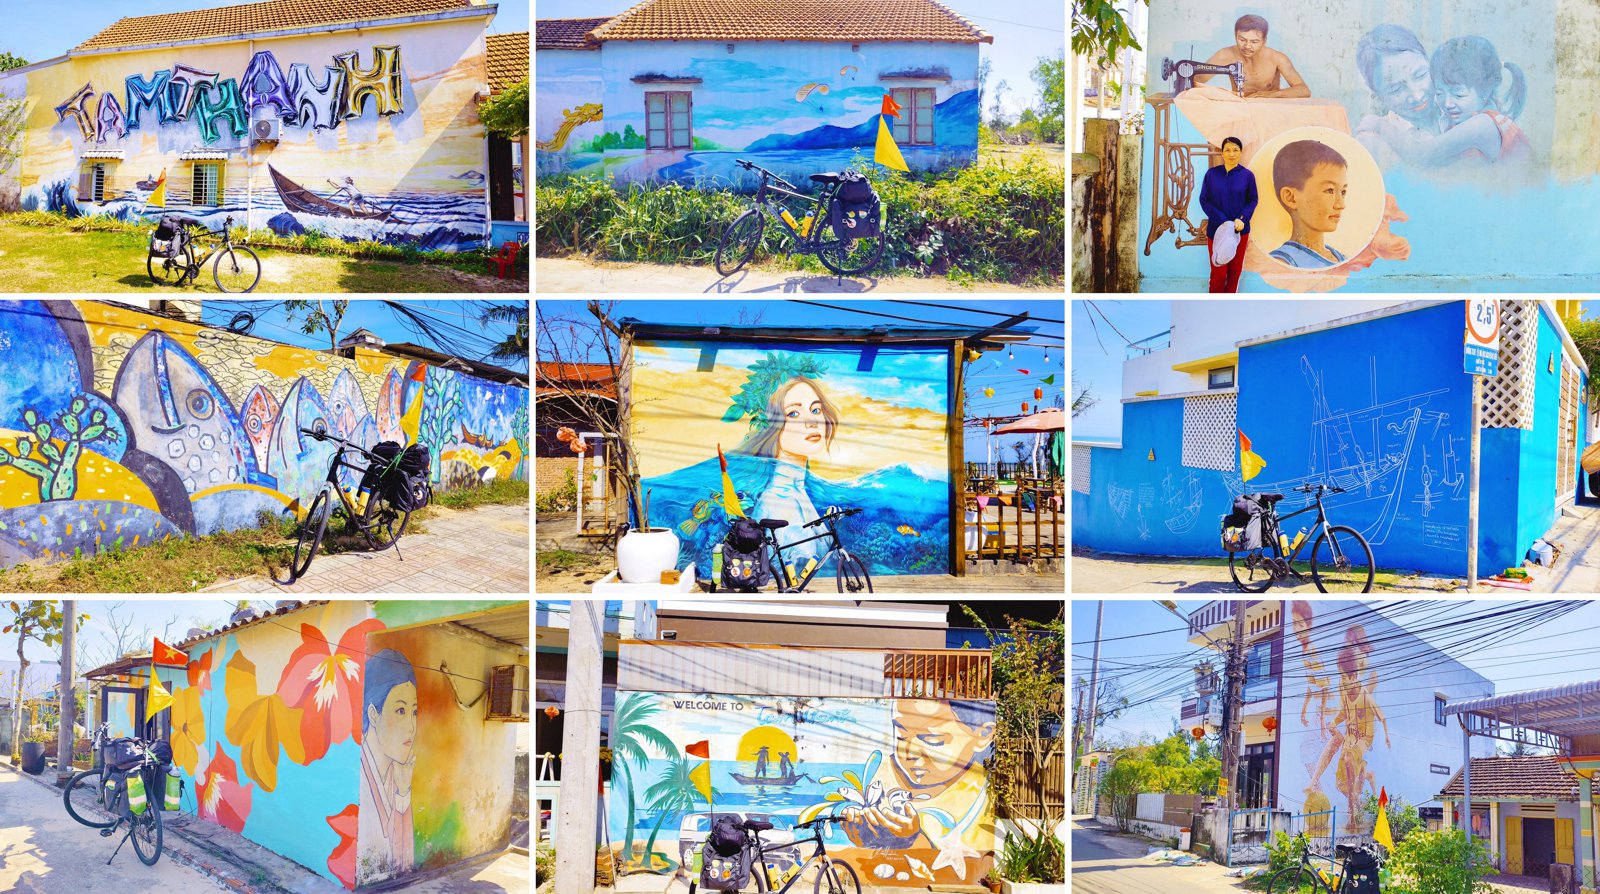 Reviving Tam Thanh: The Artistic Transformation of a Coastal Village